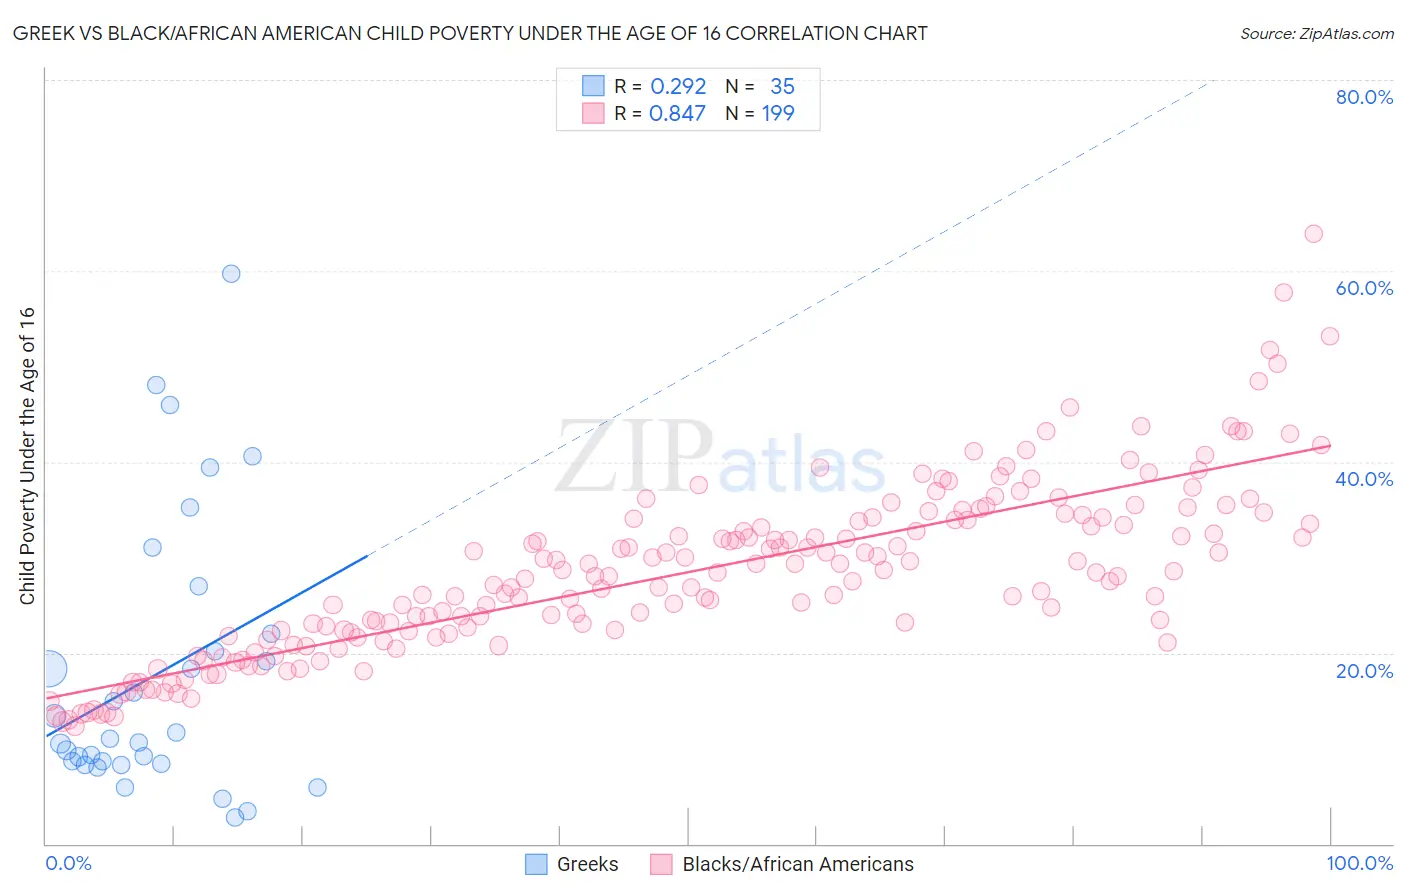 Greek vs Black/African American Child Poverty Under the Age of 16